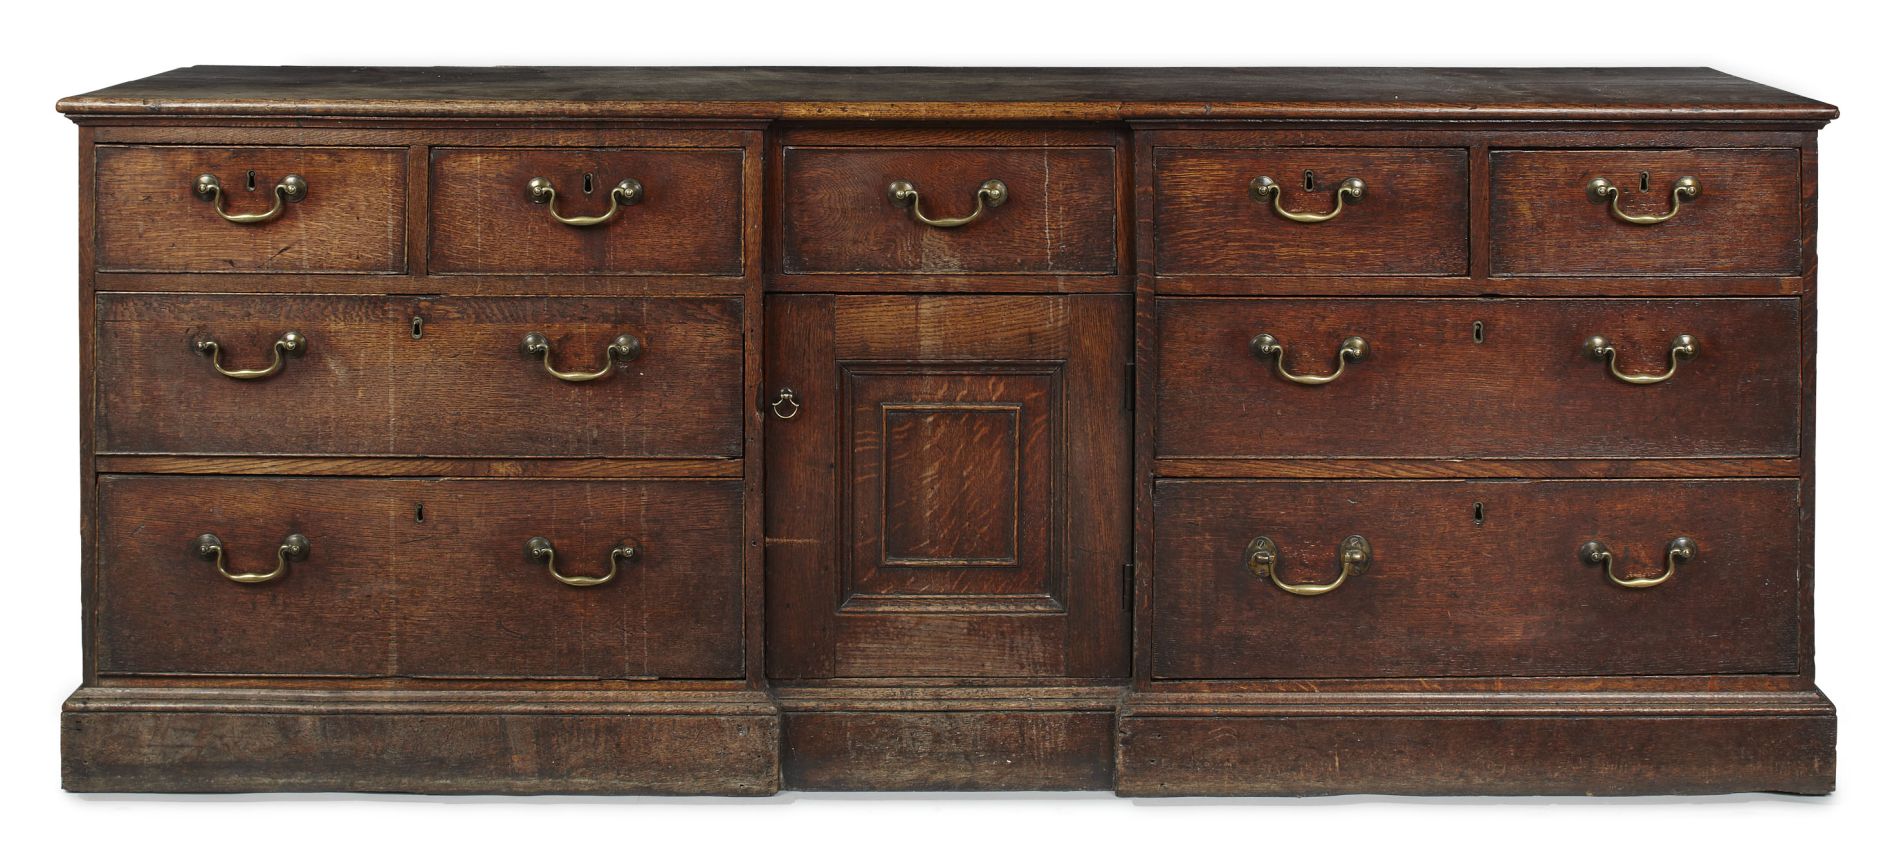 GEORGE III OAK DRESSER BASE CIRCA 1780 the rectangular top above an inverted breakfront fitted